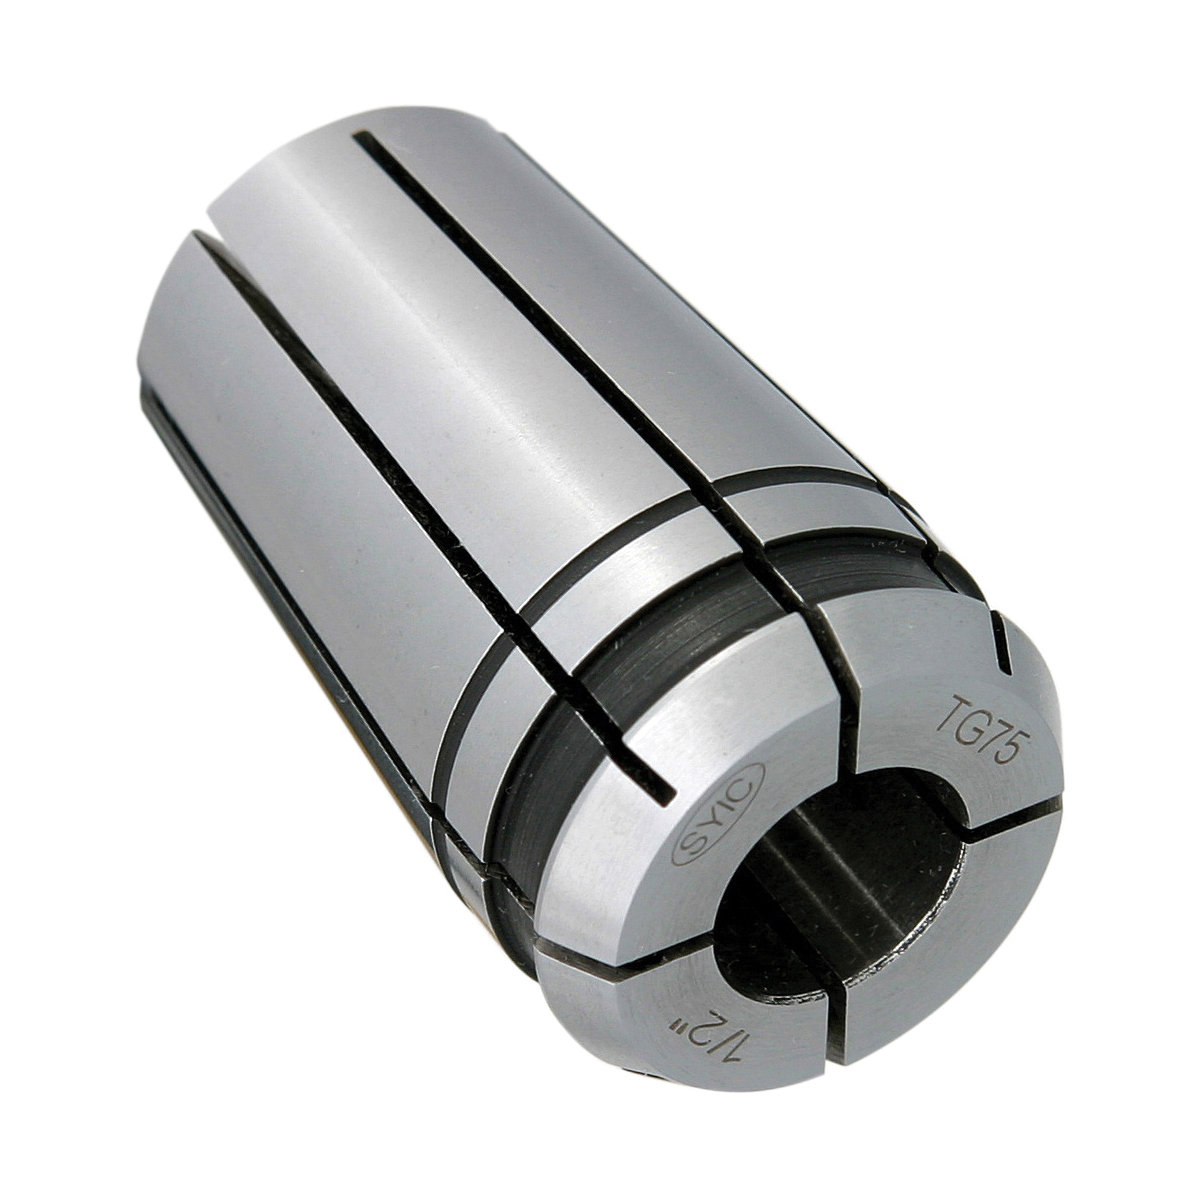 TG75 3/4" COLLET